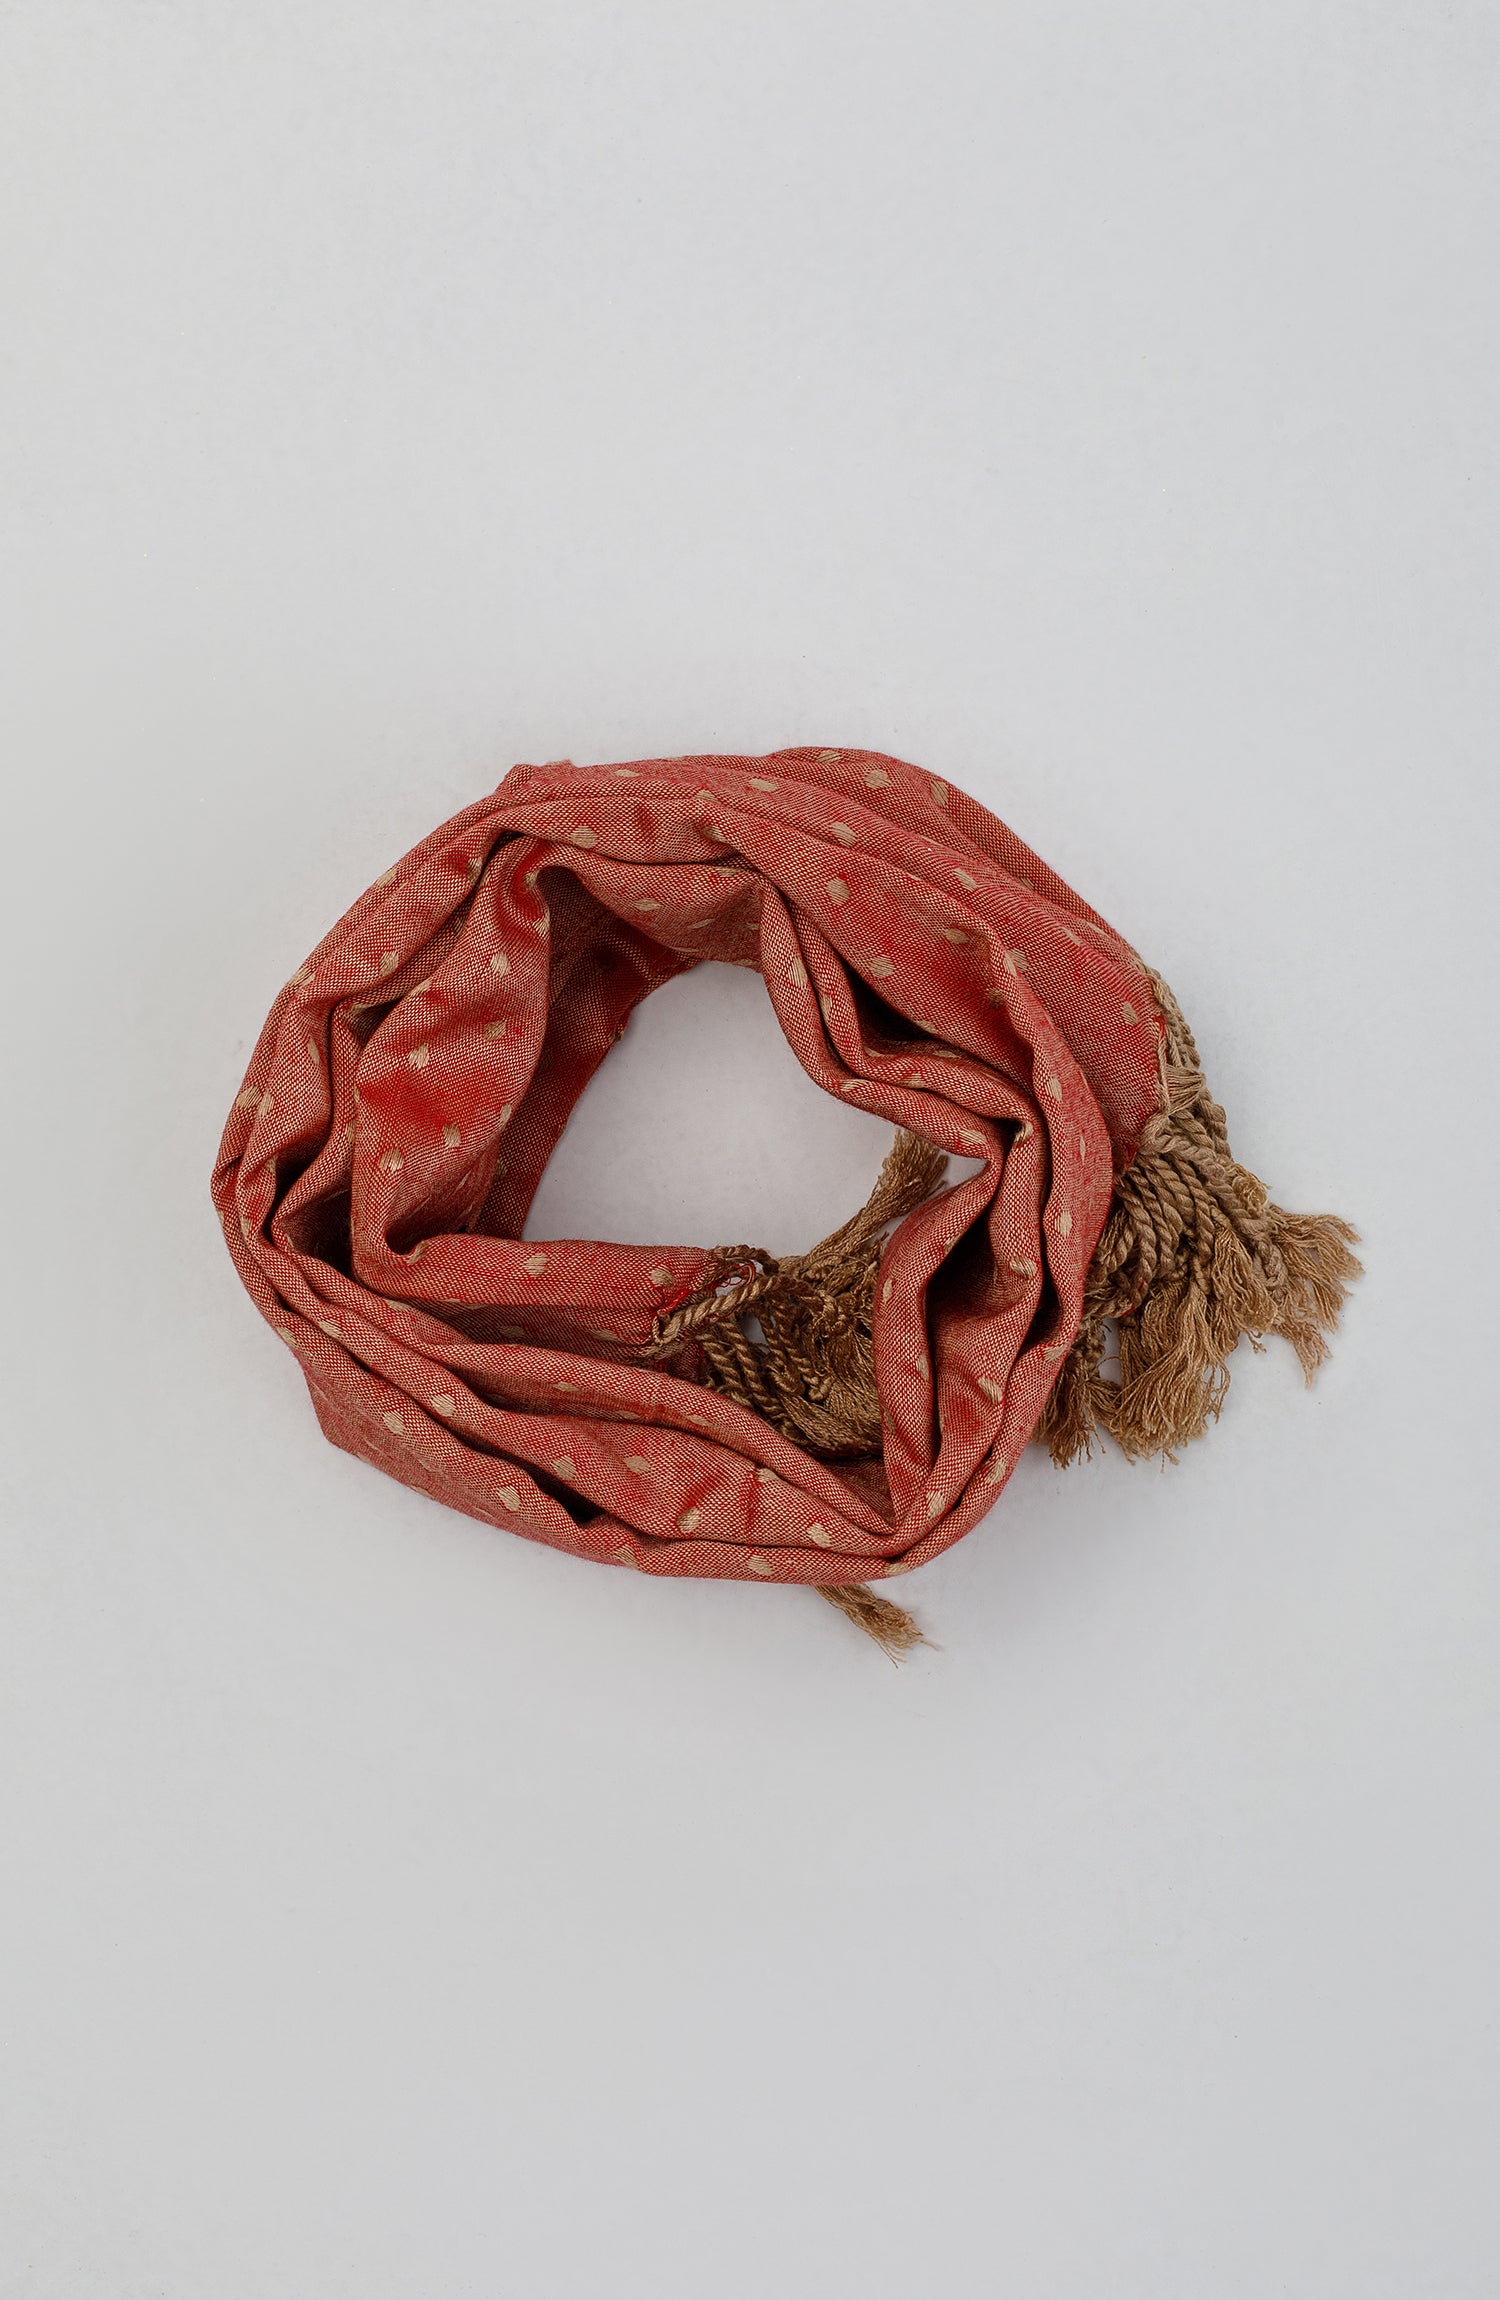 NA-D-PL-23-040 PINK COTTON  ACCESSORIES SCARF